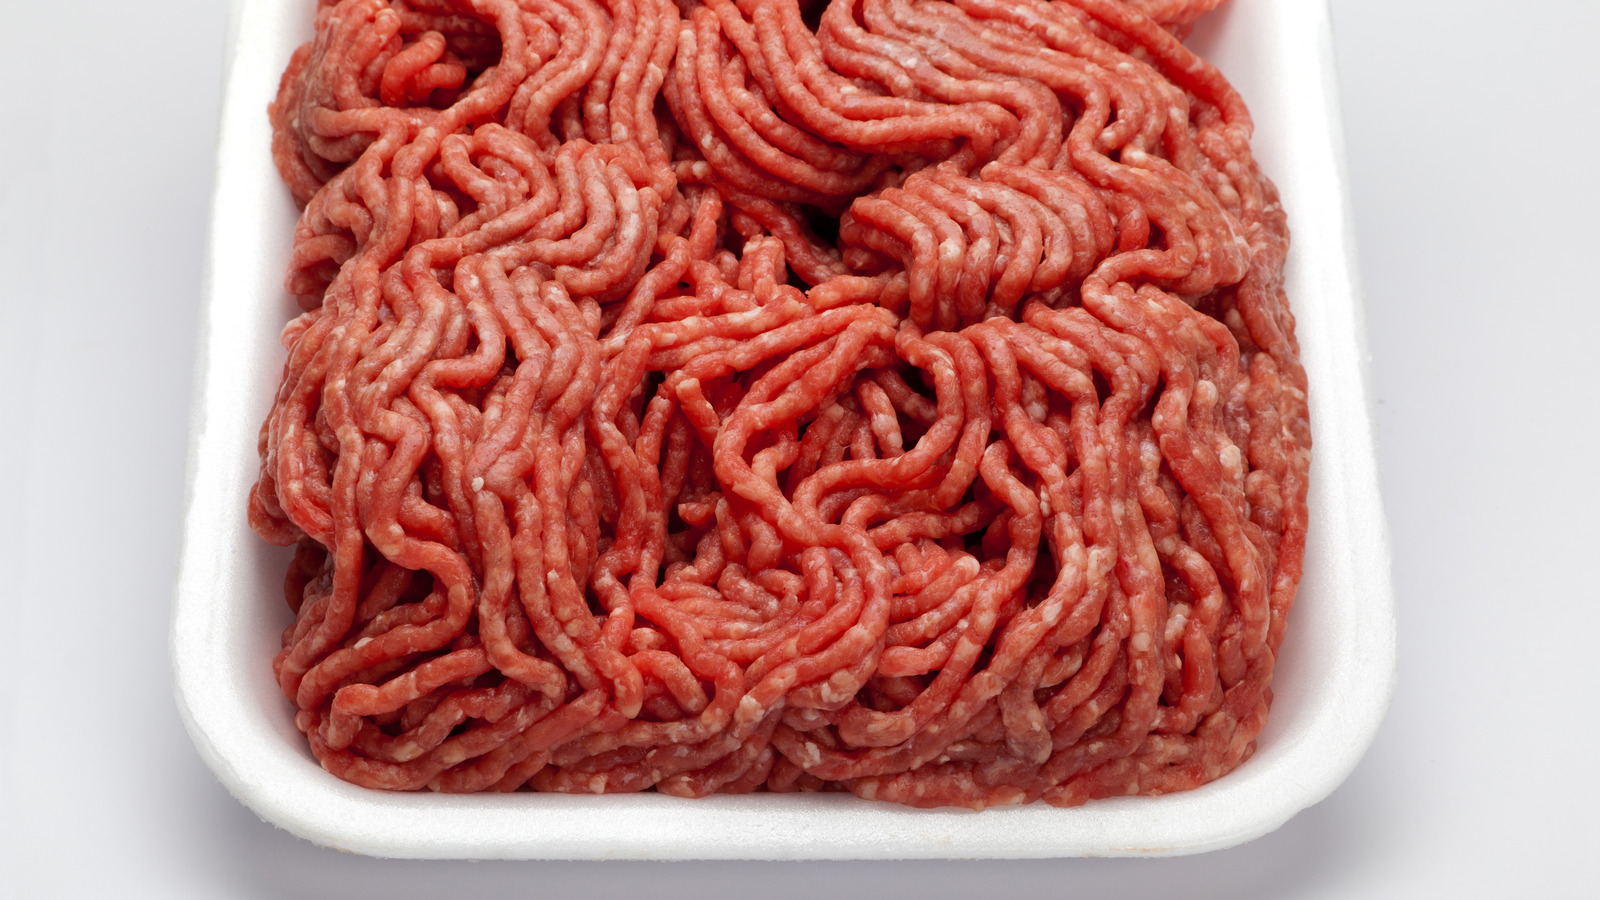 How Long Can Ground Beef Stay in the Fridge?